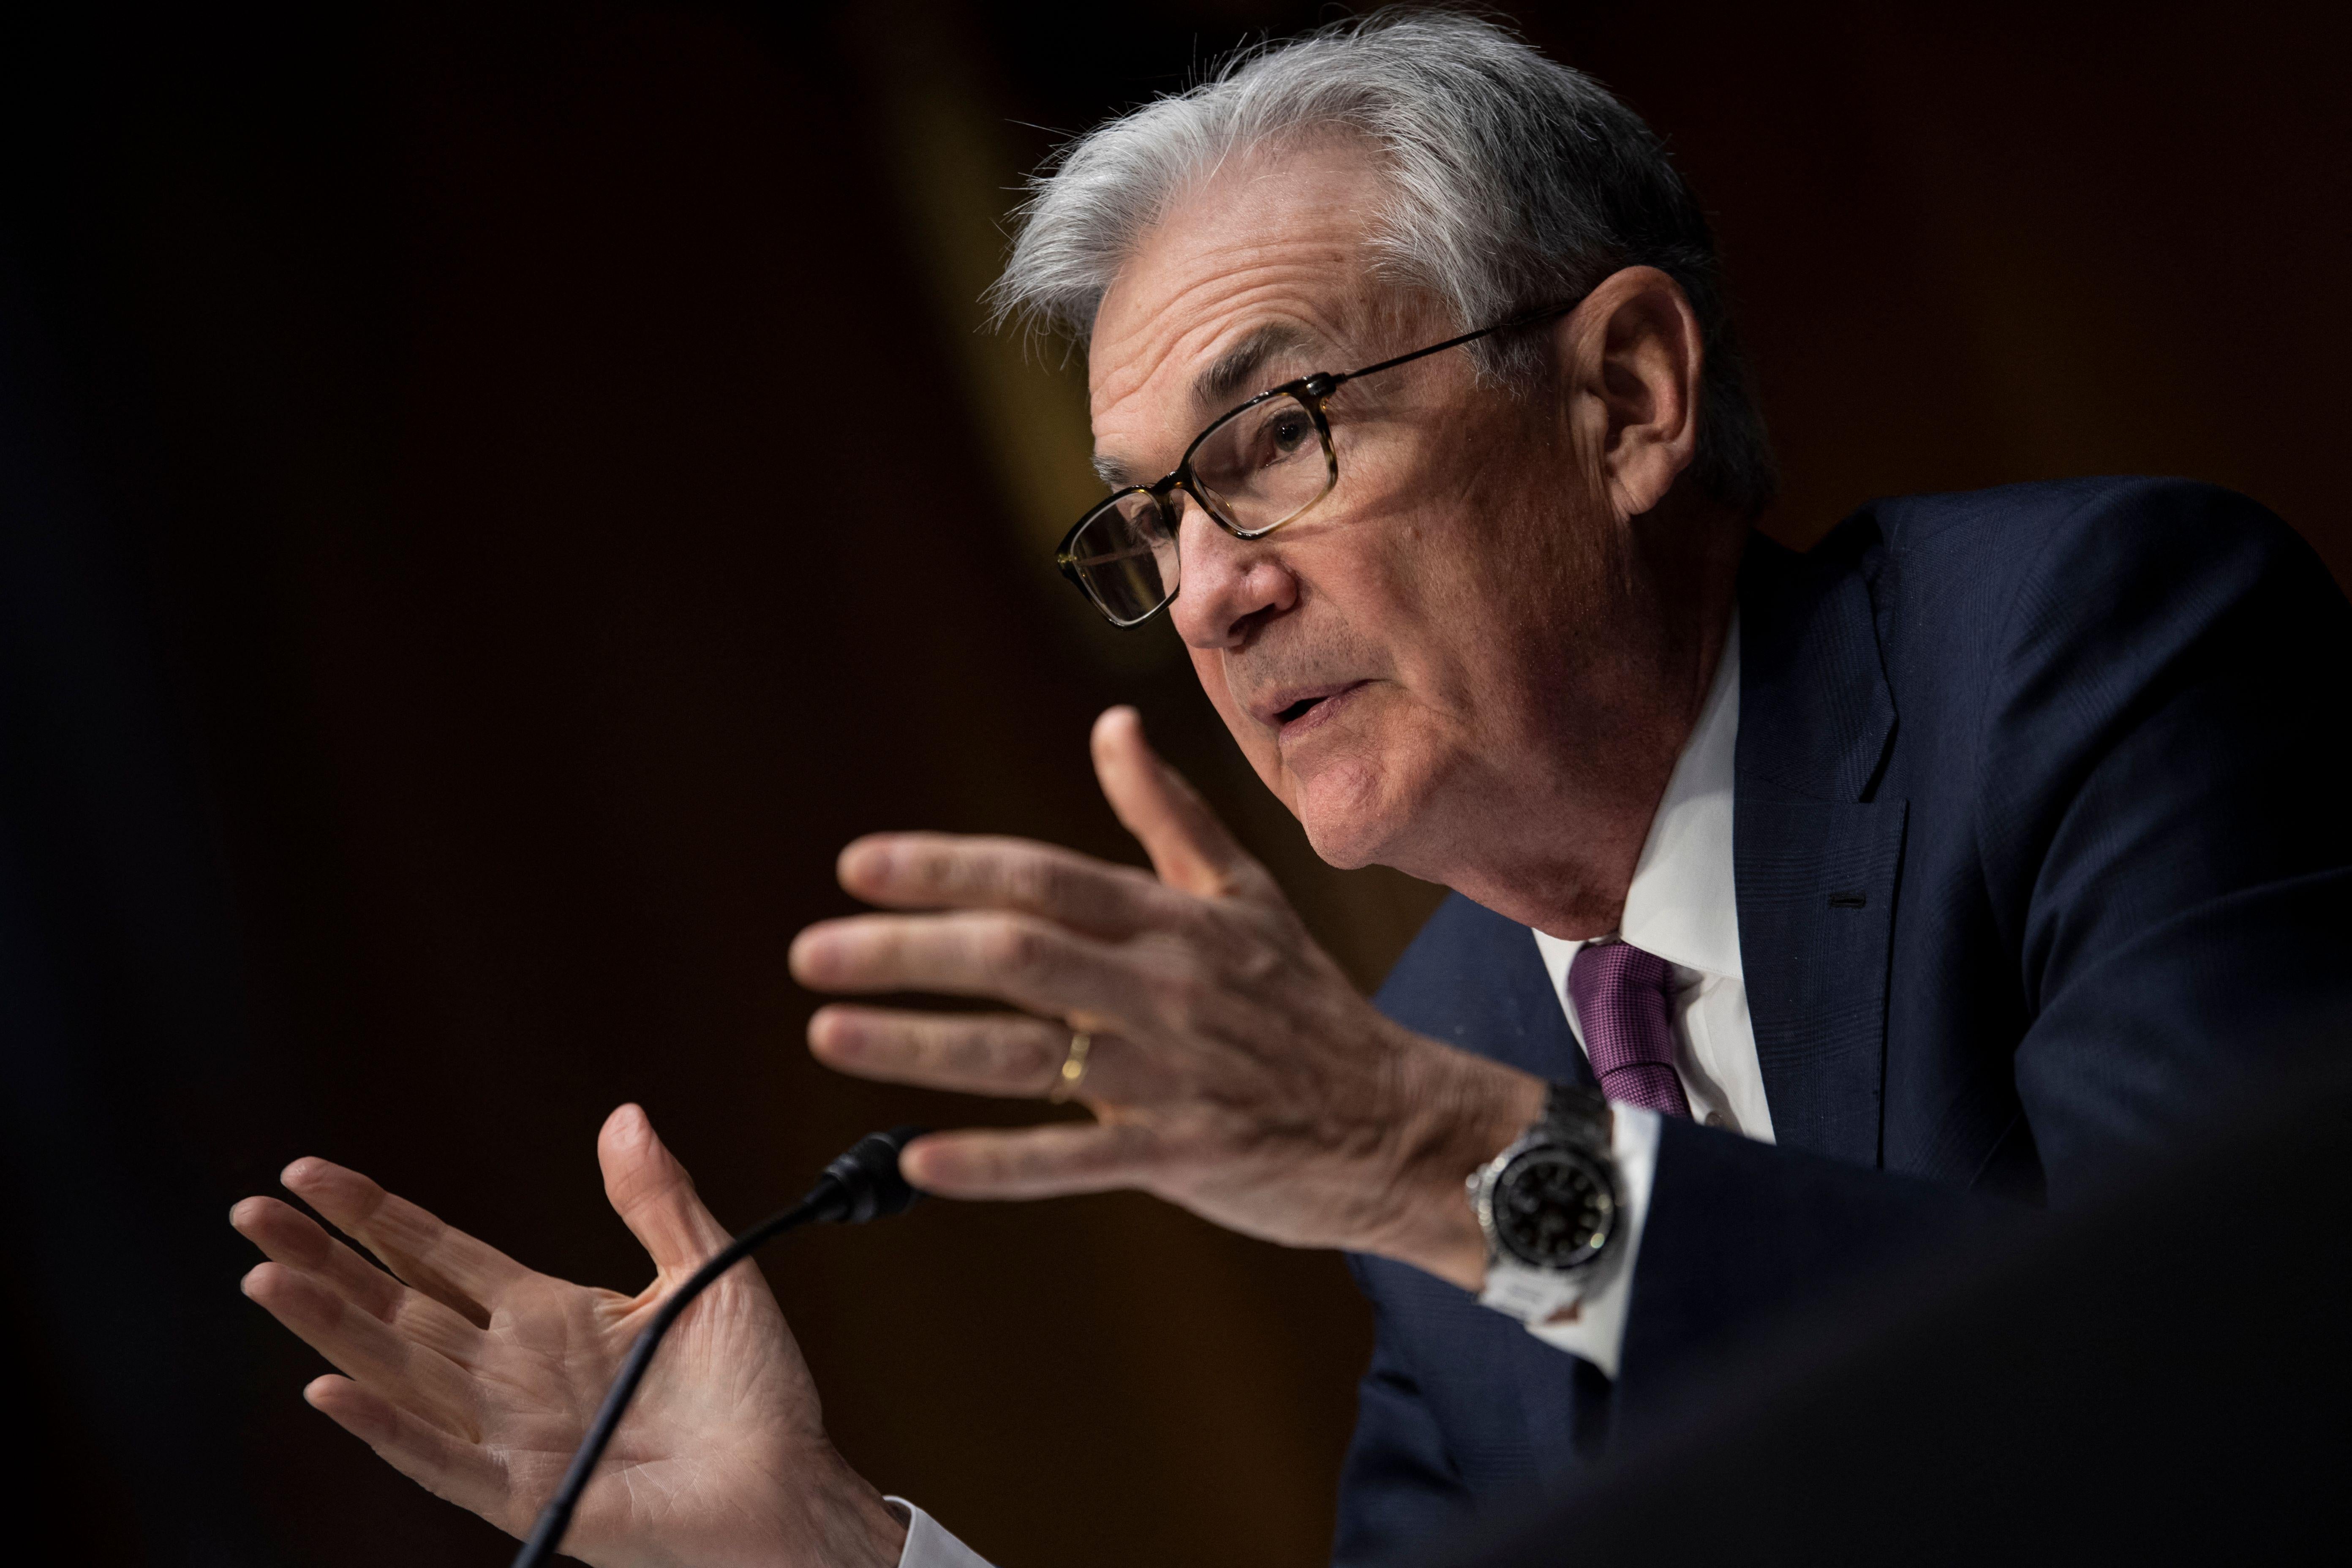 Jerome Powell gestures with both hands as he speaks seated in front of a mic